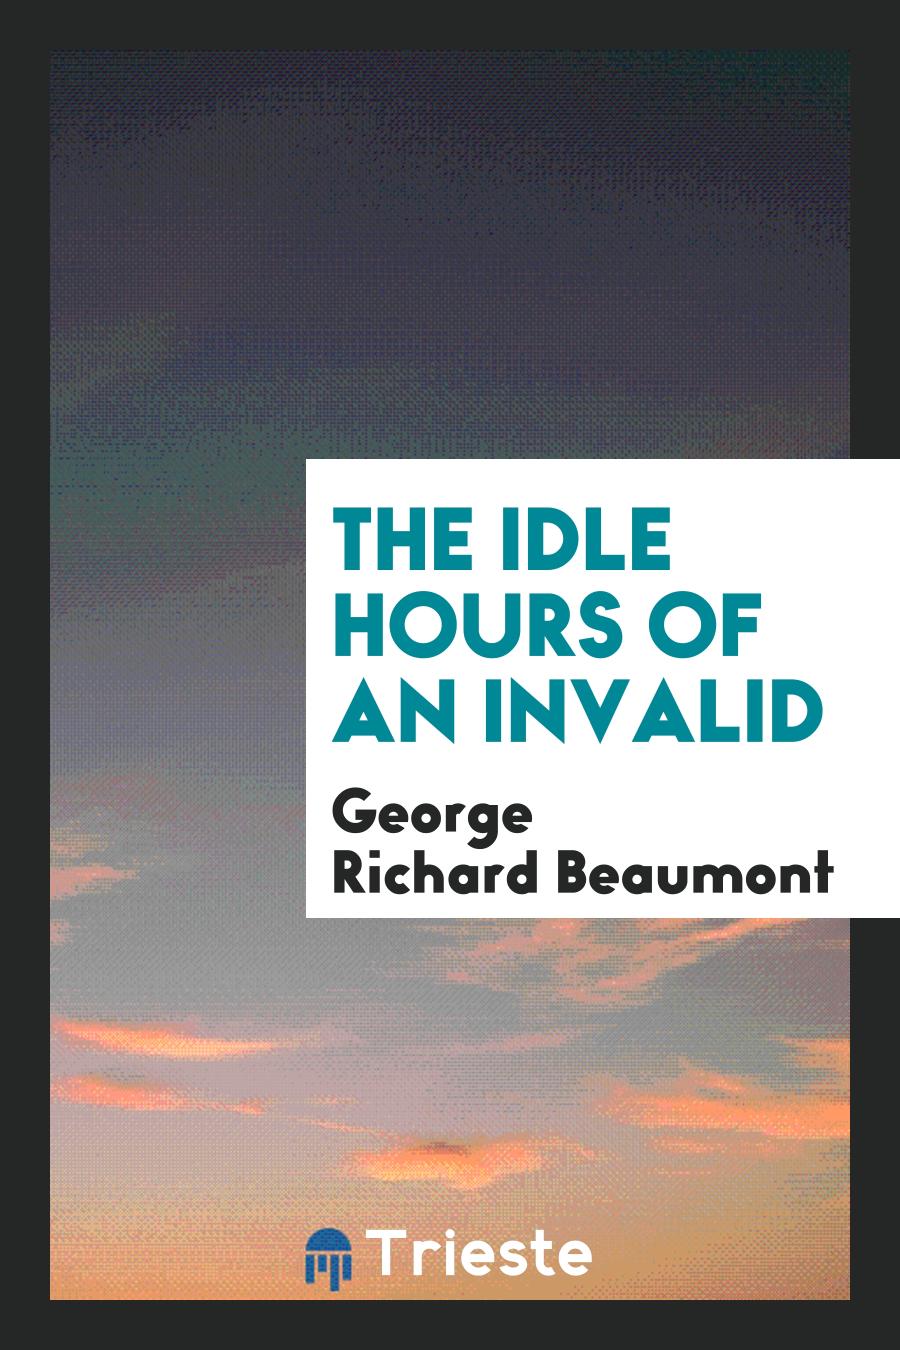 The Idle Hours of an Invalid